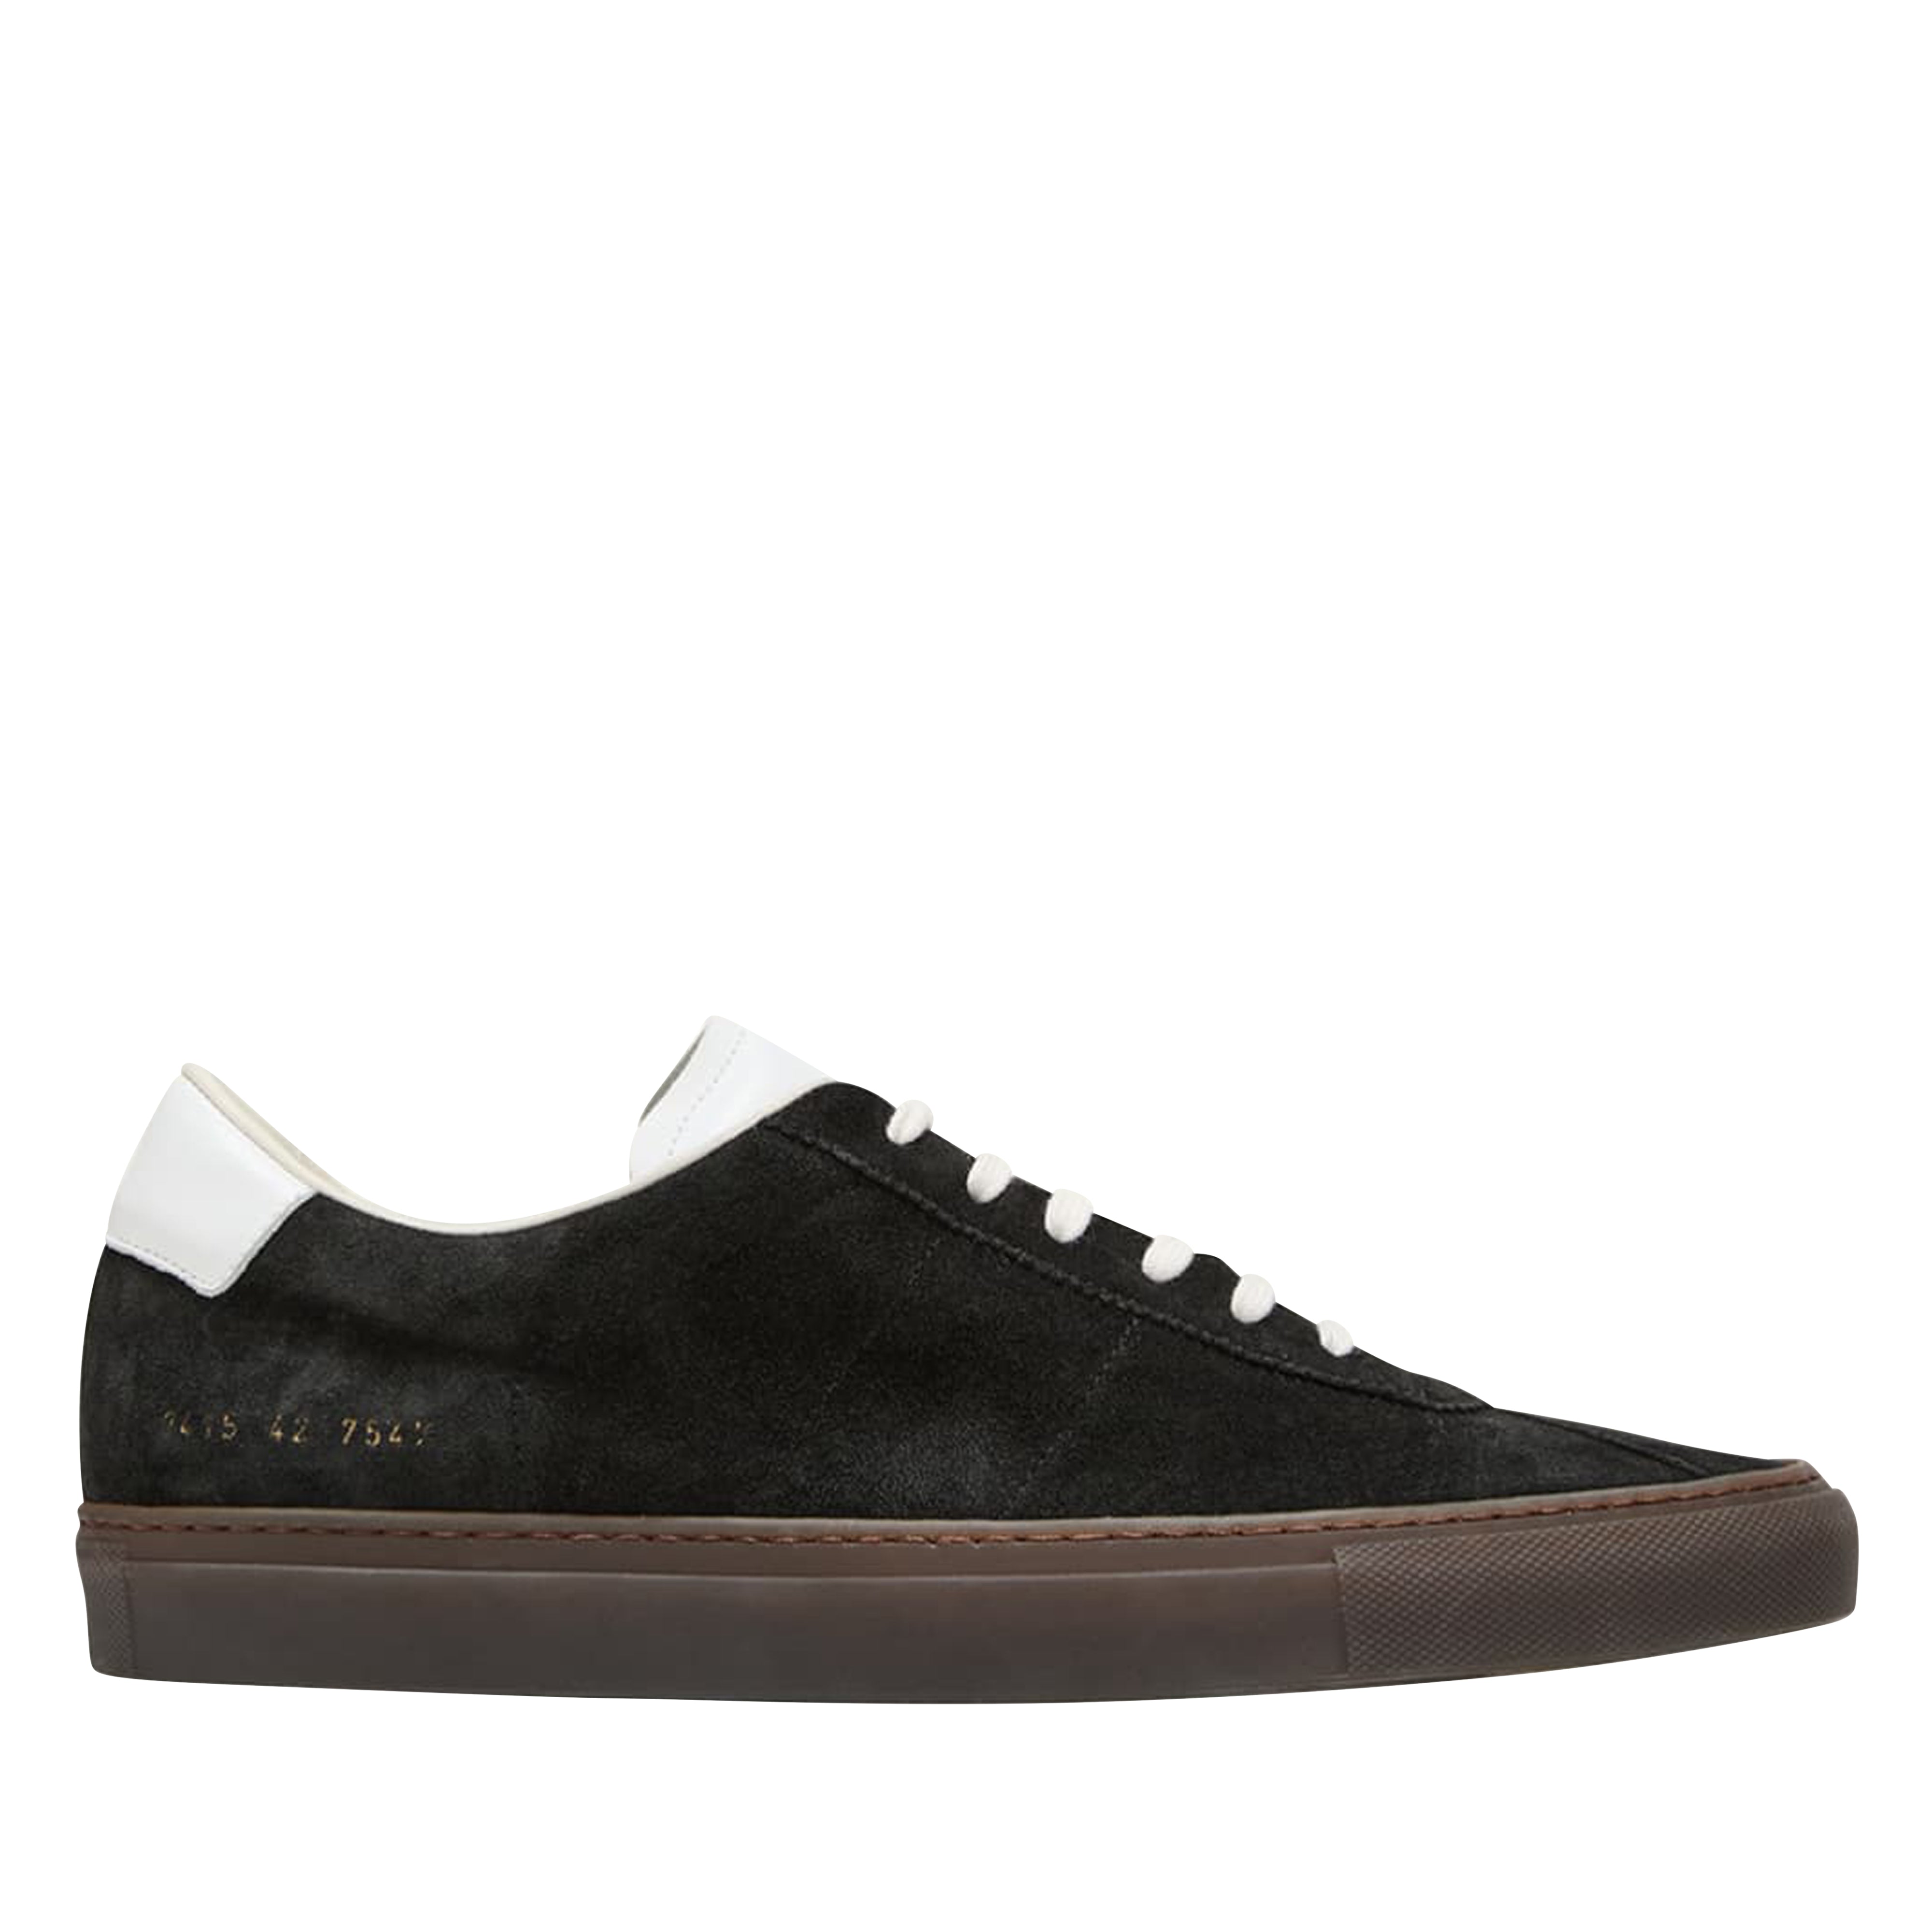 Common Projects - Tennis 70 Sneakers - (Black) – DSMNY E-SHOP